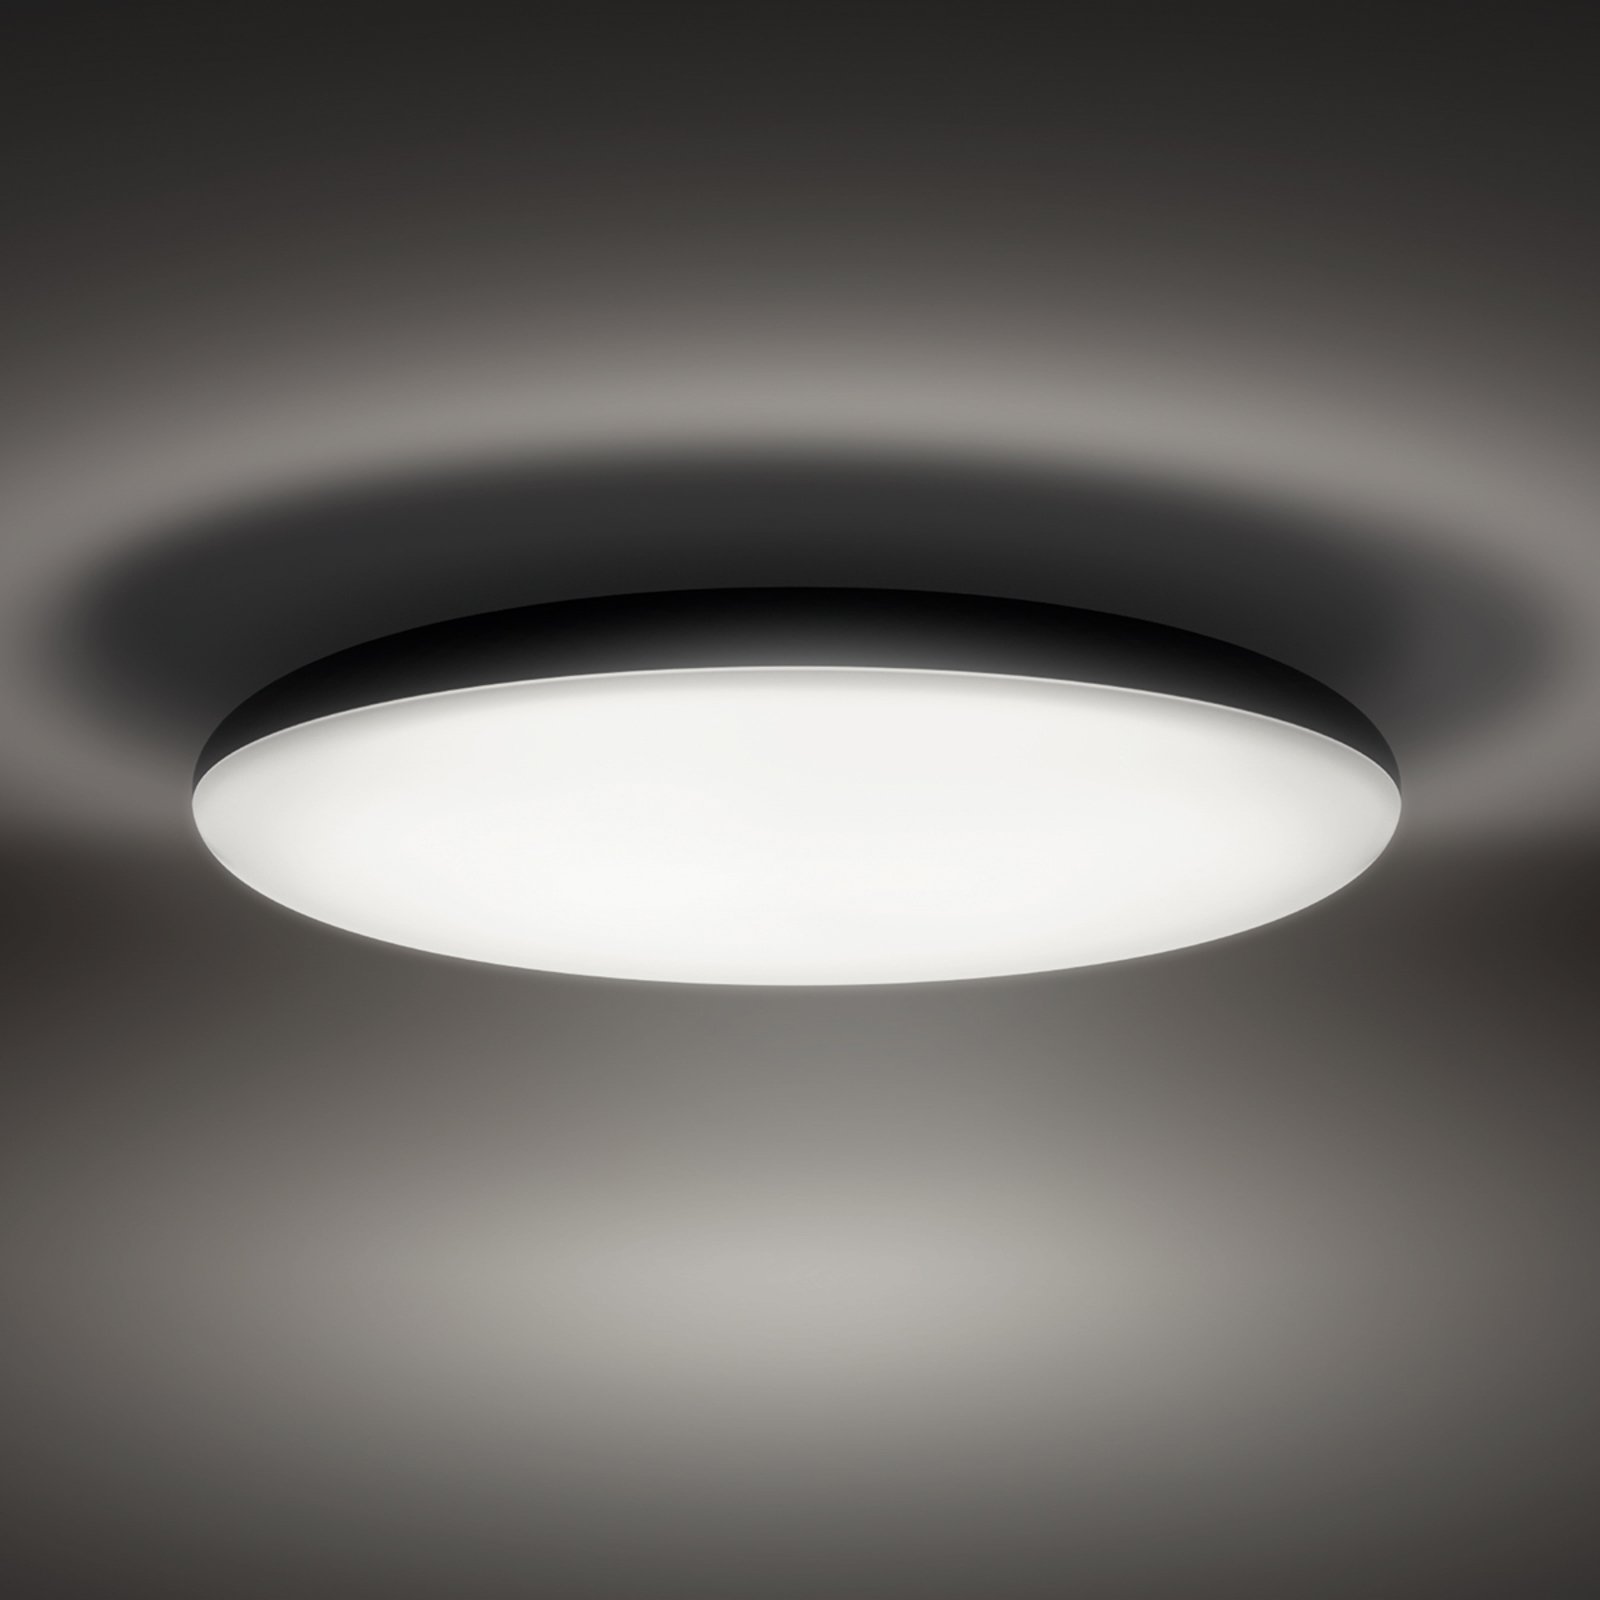 Philips Hue White Ambiance Cher ceiling light